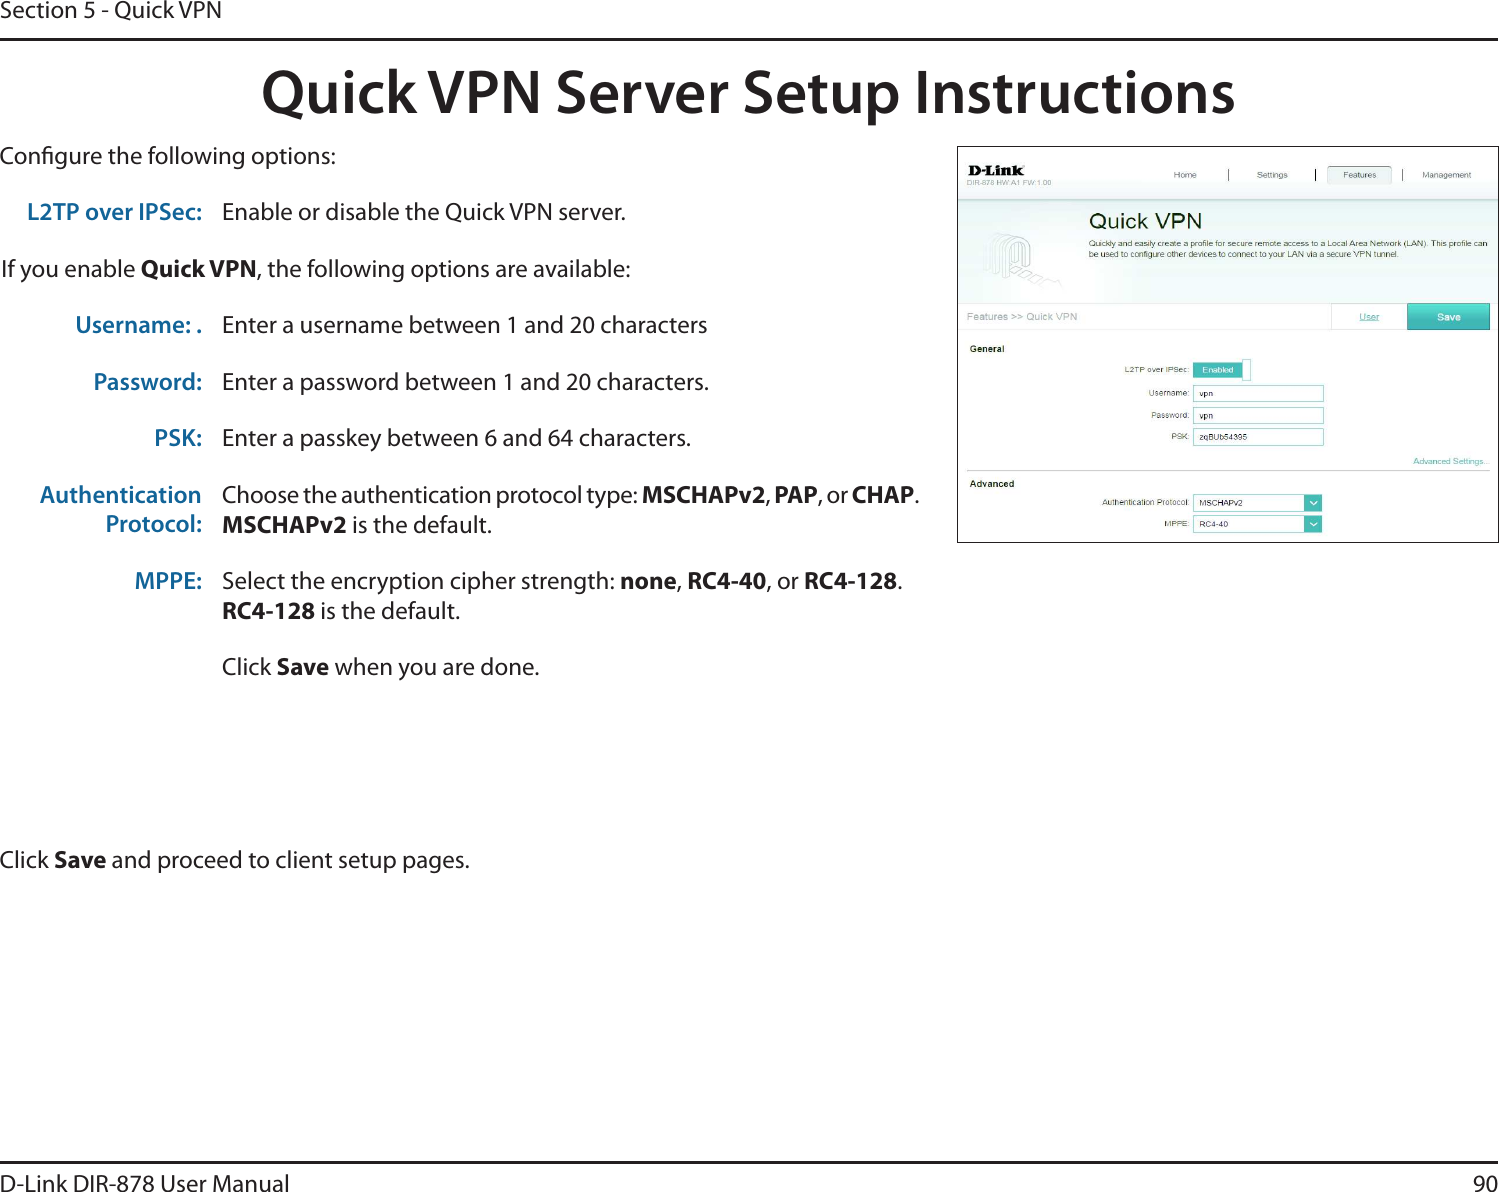 90D-Link DIR-878 User ManualSection 5 - Quick VPNQuick VPN Server Setup InstructionsCongure the following options:Click Save and proceed to client setup pages.L2TP over IPSec: Enable or disable the Quick VPN server.If you enable Quick VPN, the following options are available:Username: . Enter a username between 1 and 20 charactersPassword: Enter a password between 1 and 20 characters.PSK: Enter a passkey between 6 and 64 characters.AuthenticationProtocol:Choose the authentication protocol type: .4$)&quot;1W, 1&quot;1, or $)&quot;1..4$)&quot;1Wis the default.MPPE: Select the encryption cipher strength: none,RC4-40, or RC4-128.RC4-128 is the default.Click Save when you are done.